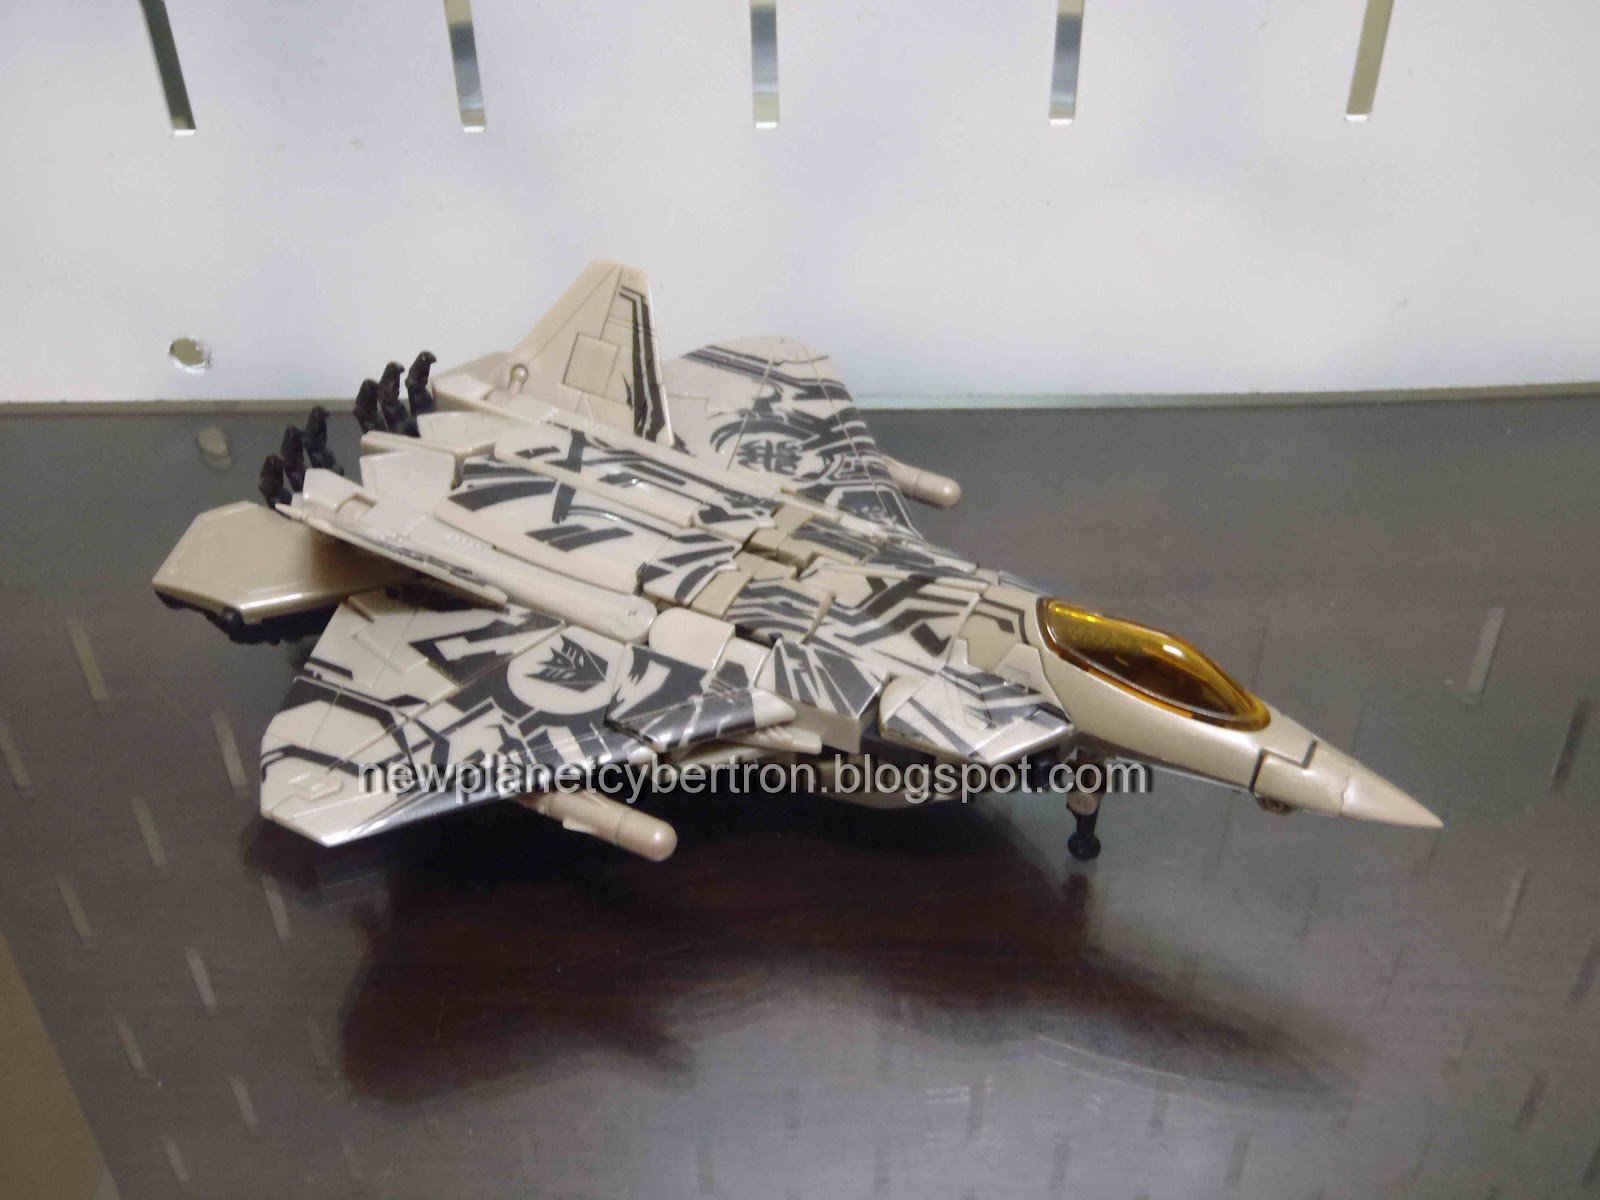 New Planet Cybertron: Transformers Review – Starscream (Rotf Voyager)